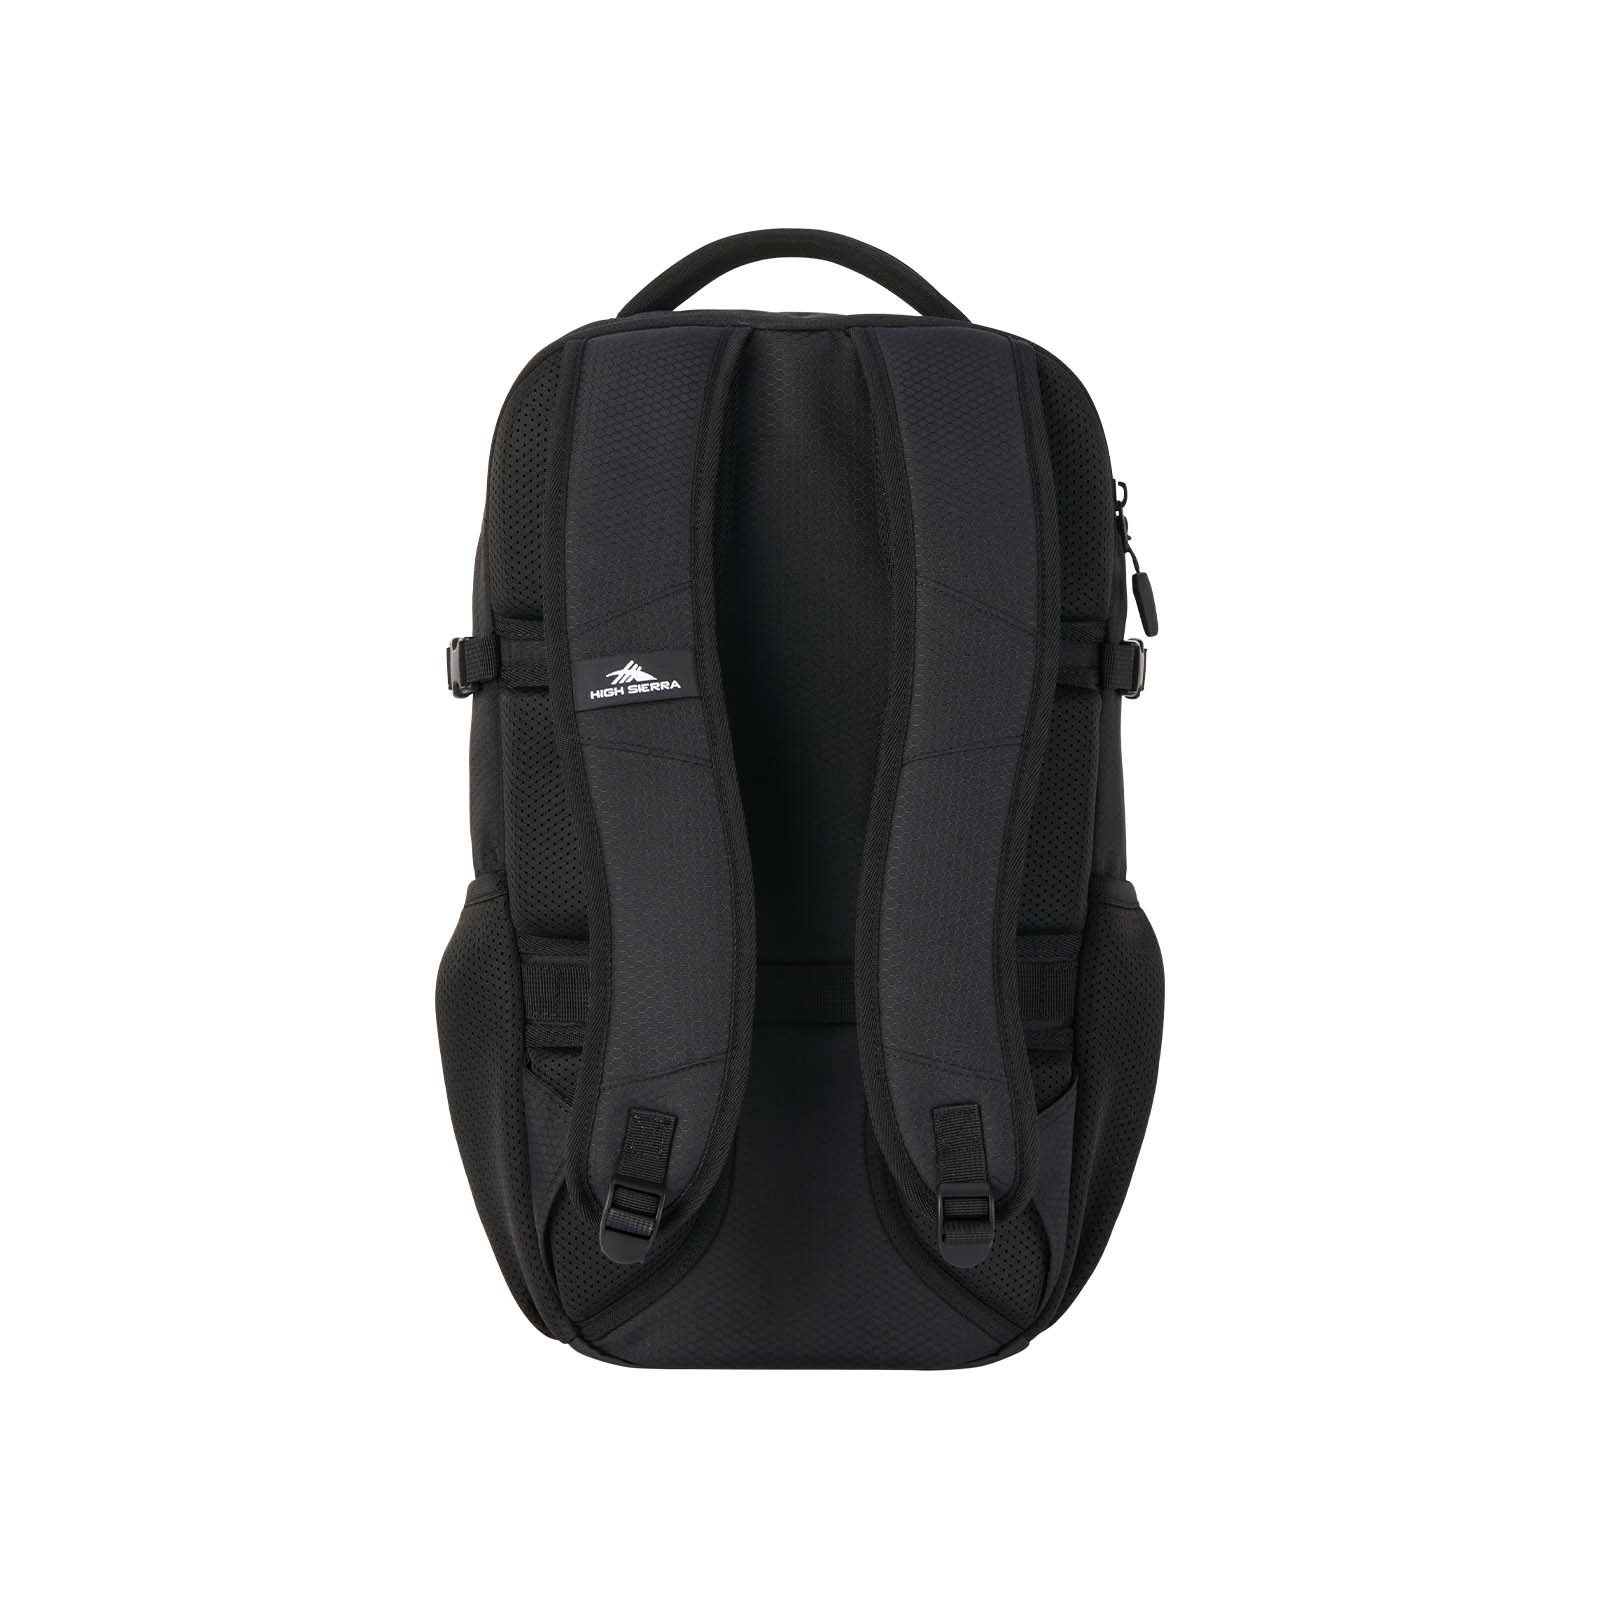 High-Sierra-Crossover-15-Inch-Laptop-Backpack-Black-Harness